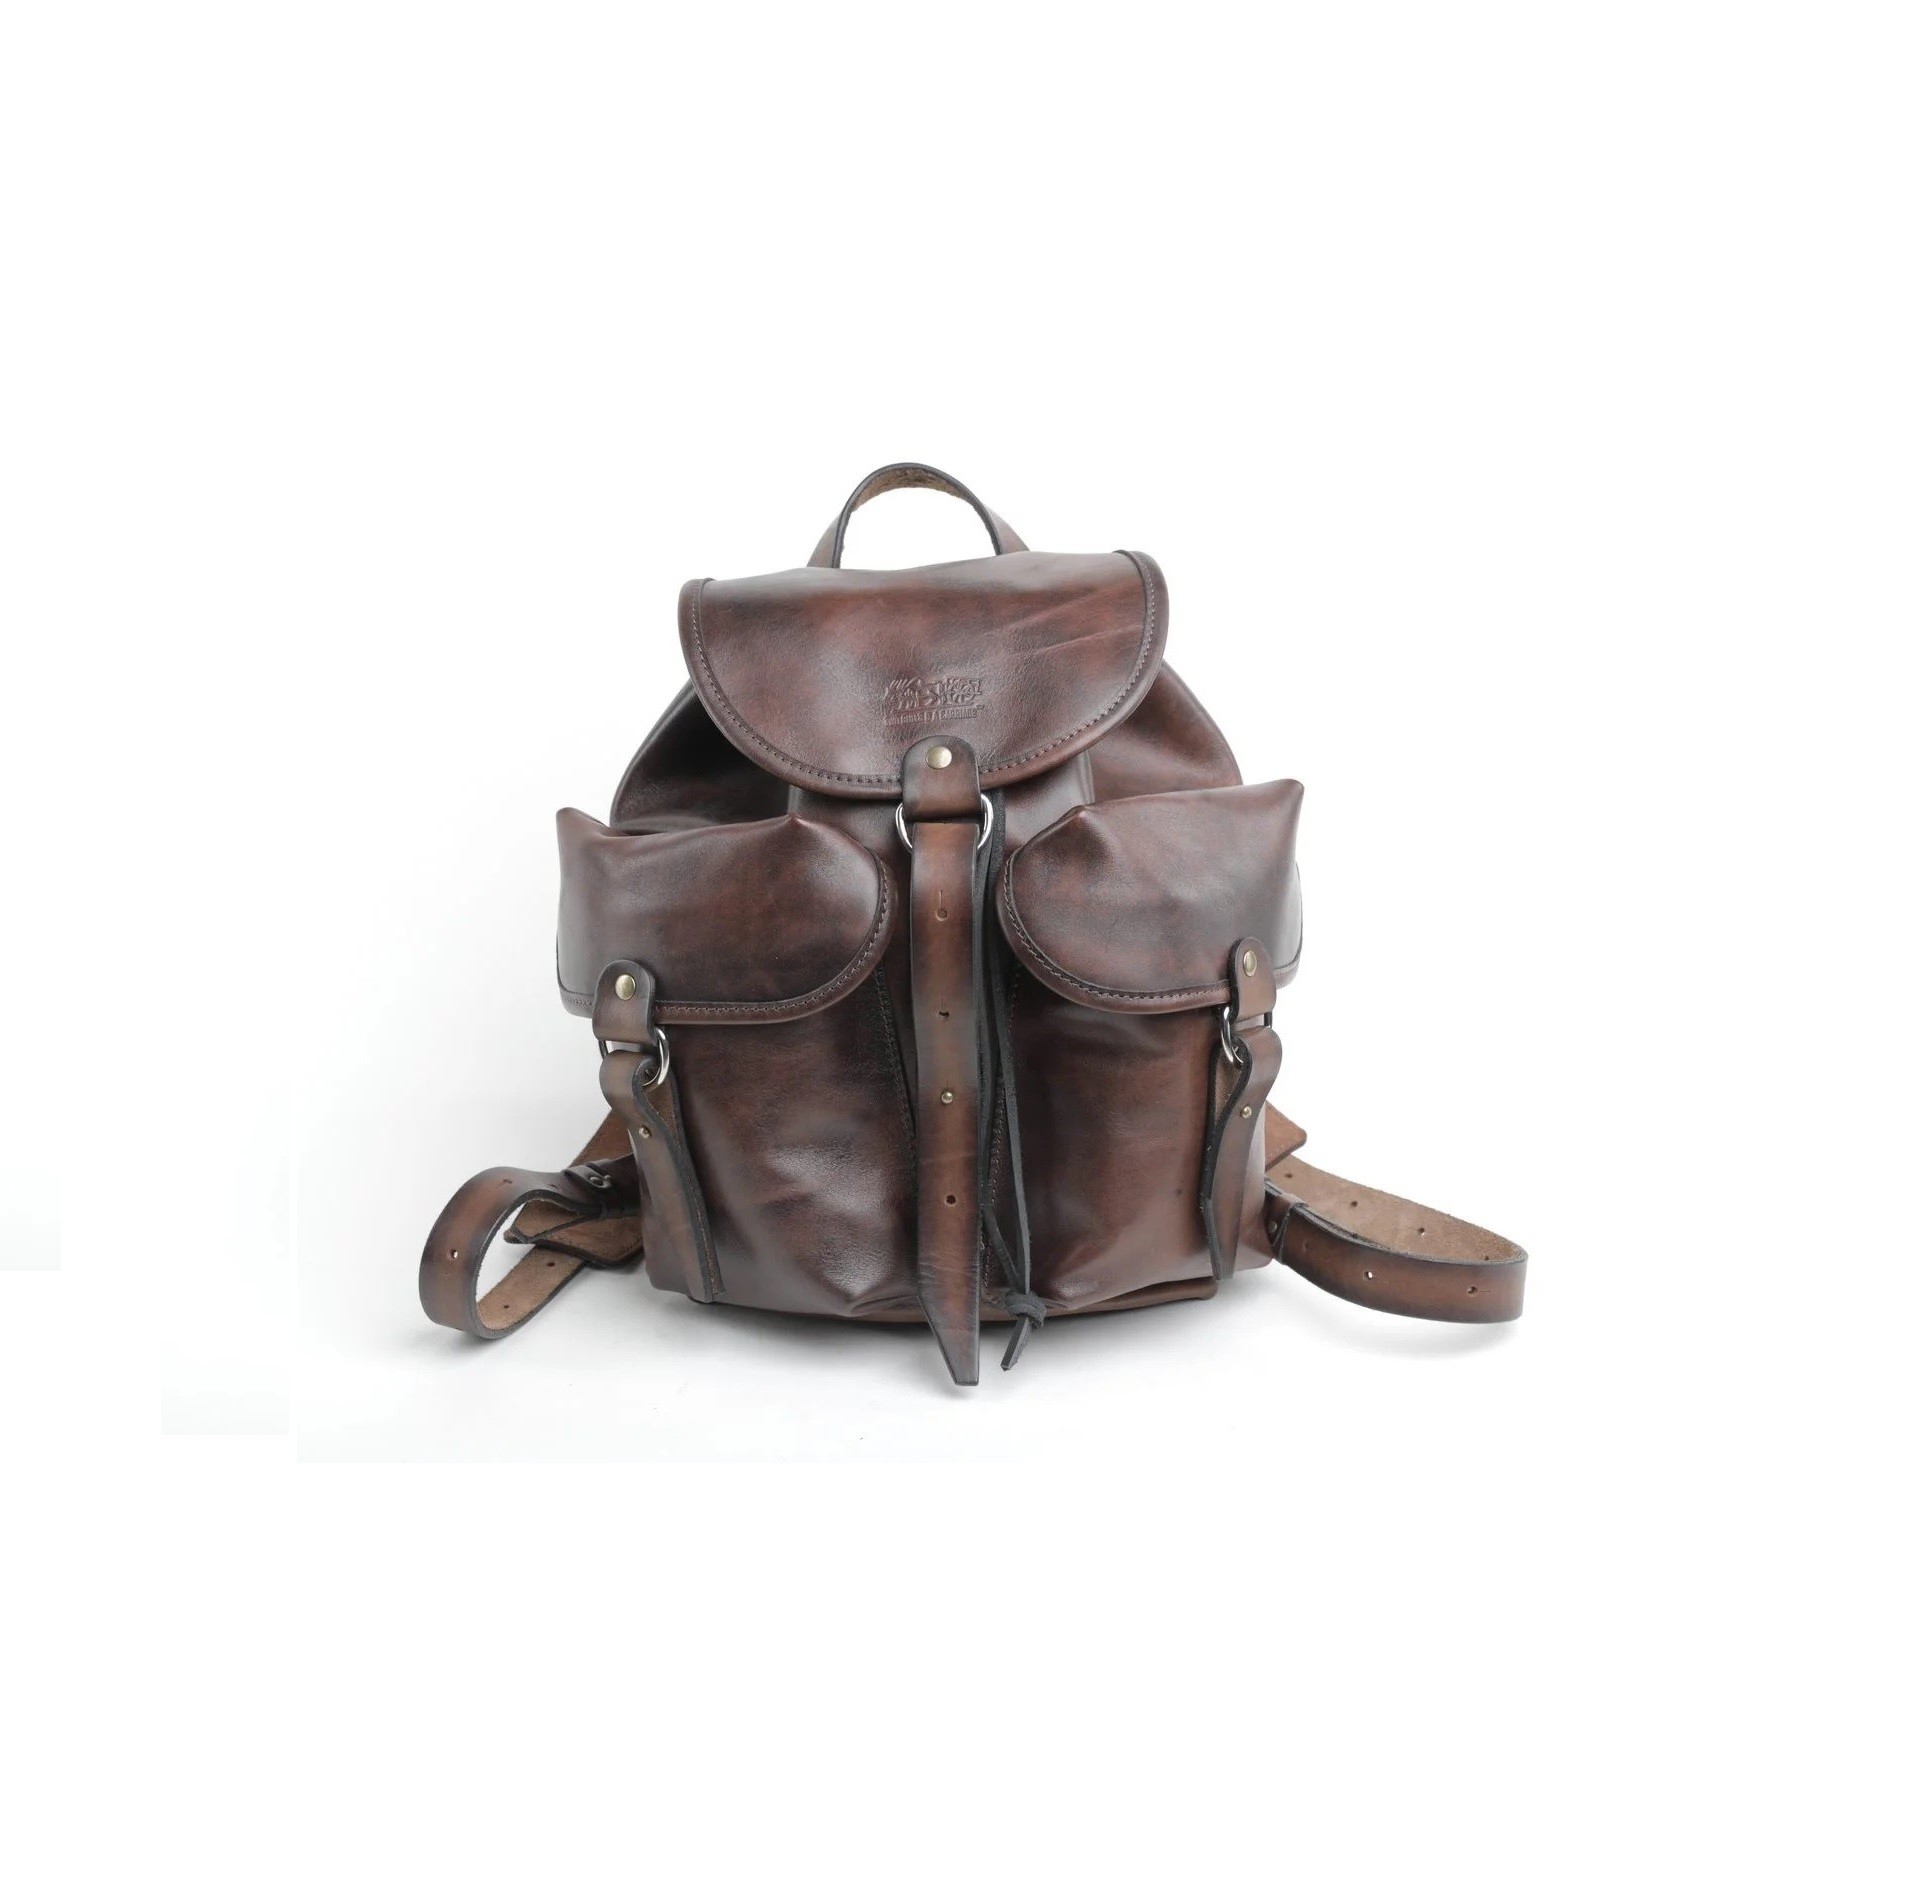 Classic backpack made of ox leather